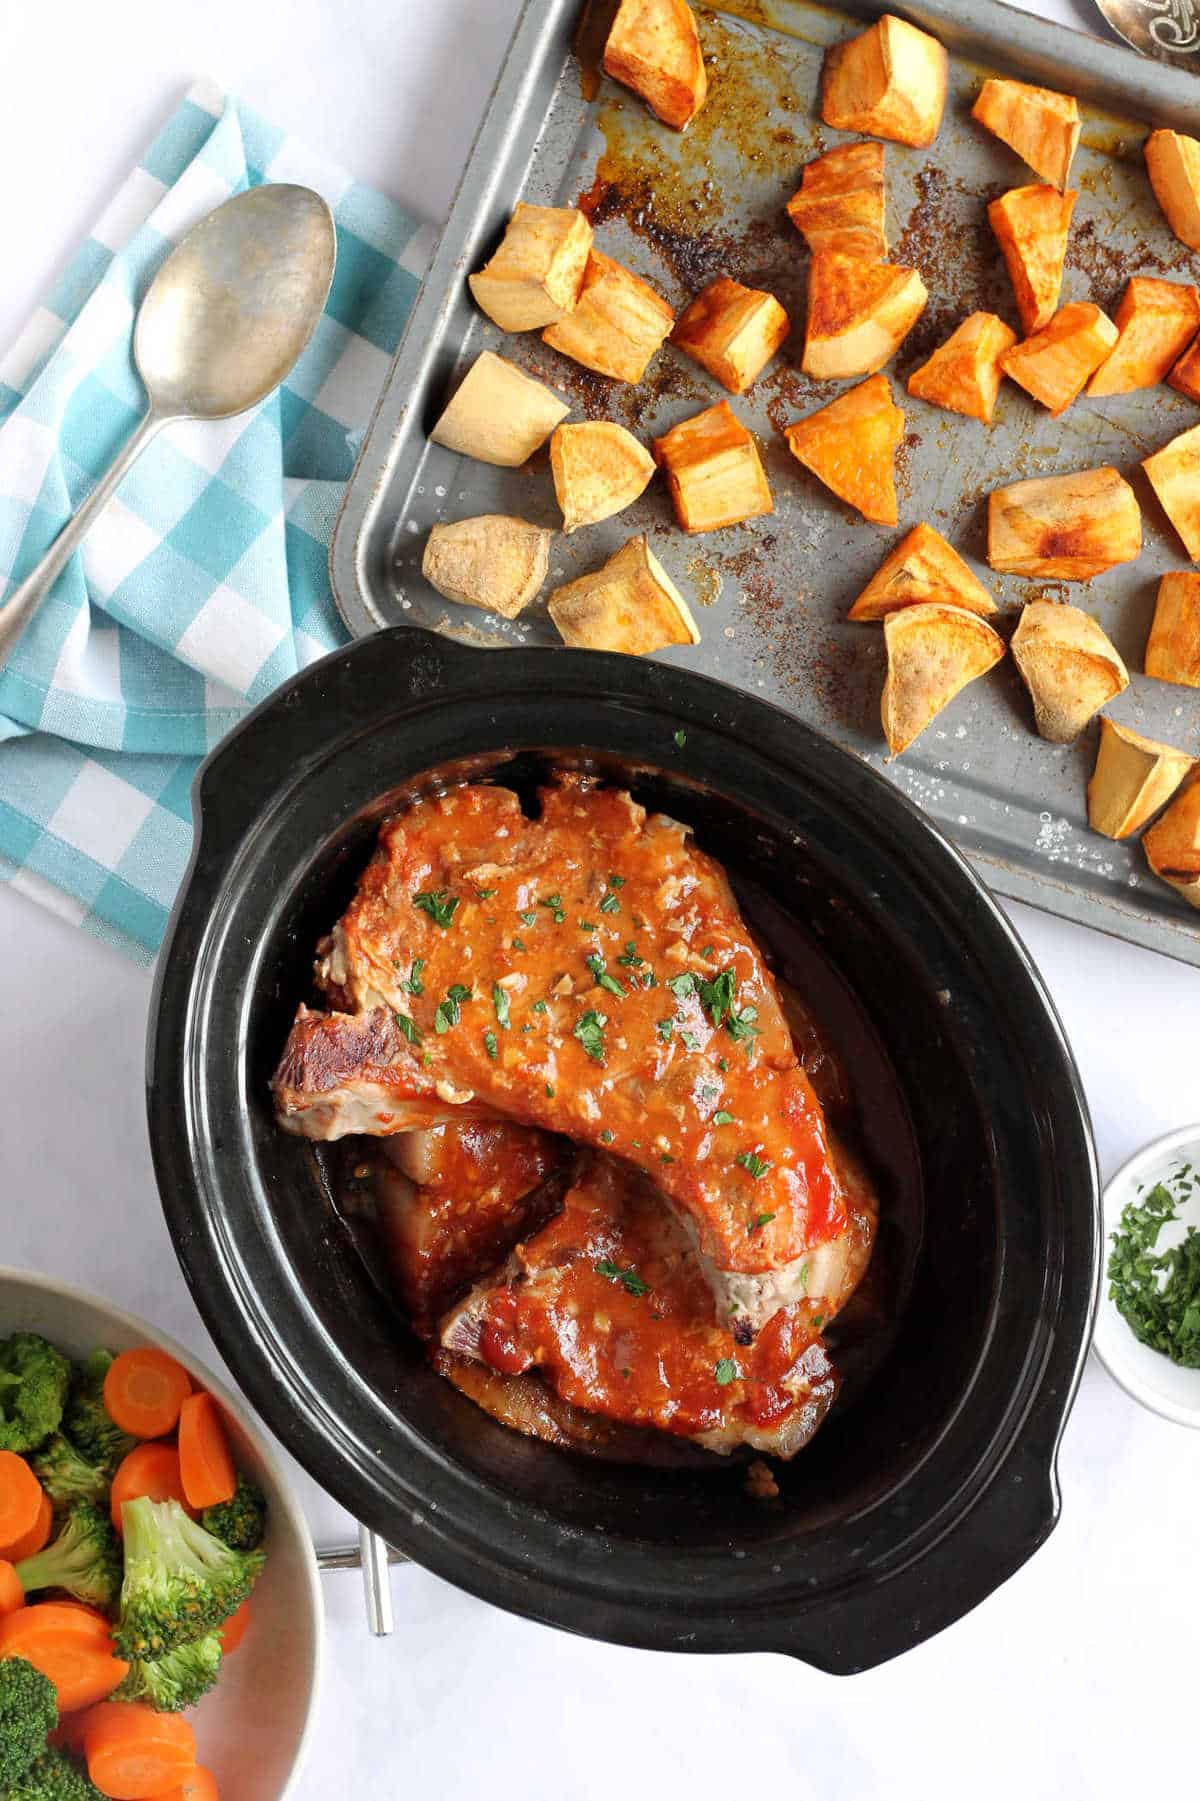 Overhead image of pork chops in a slow cooker